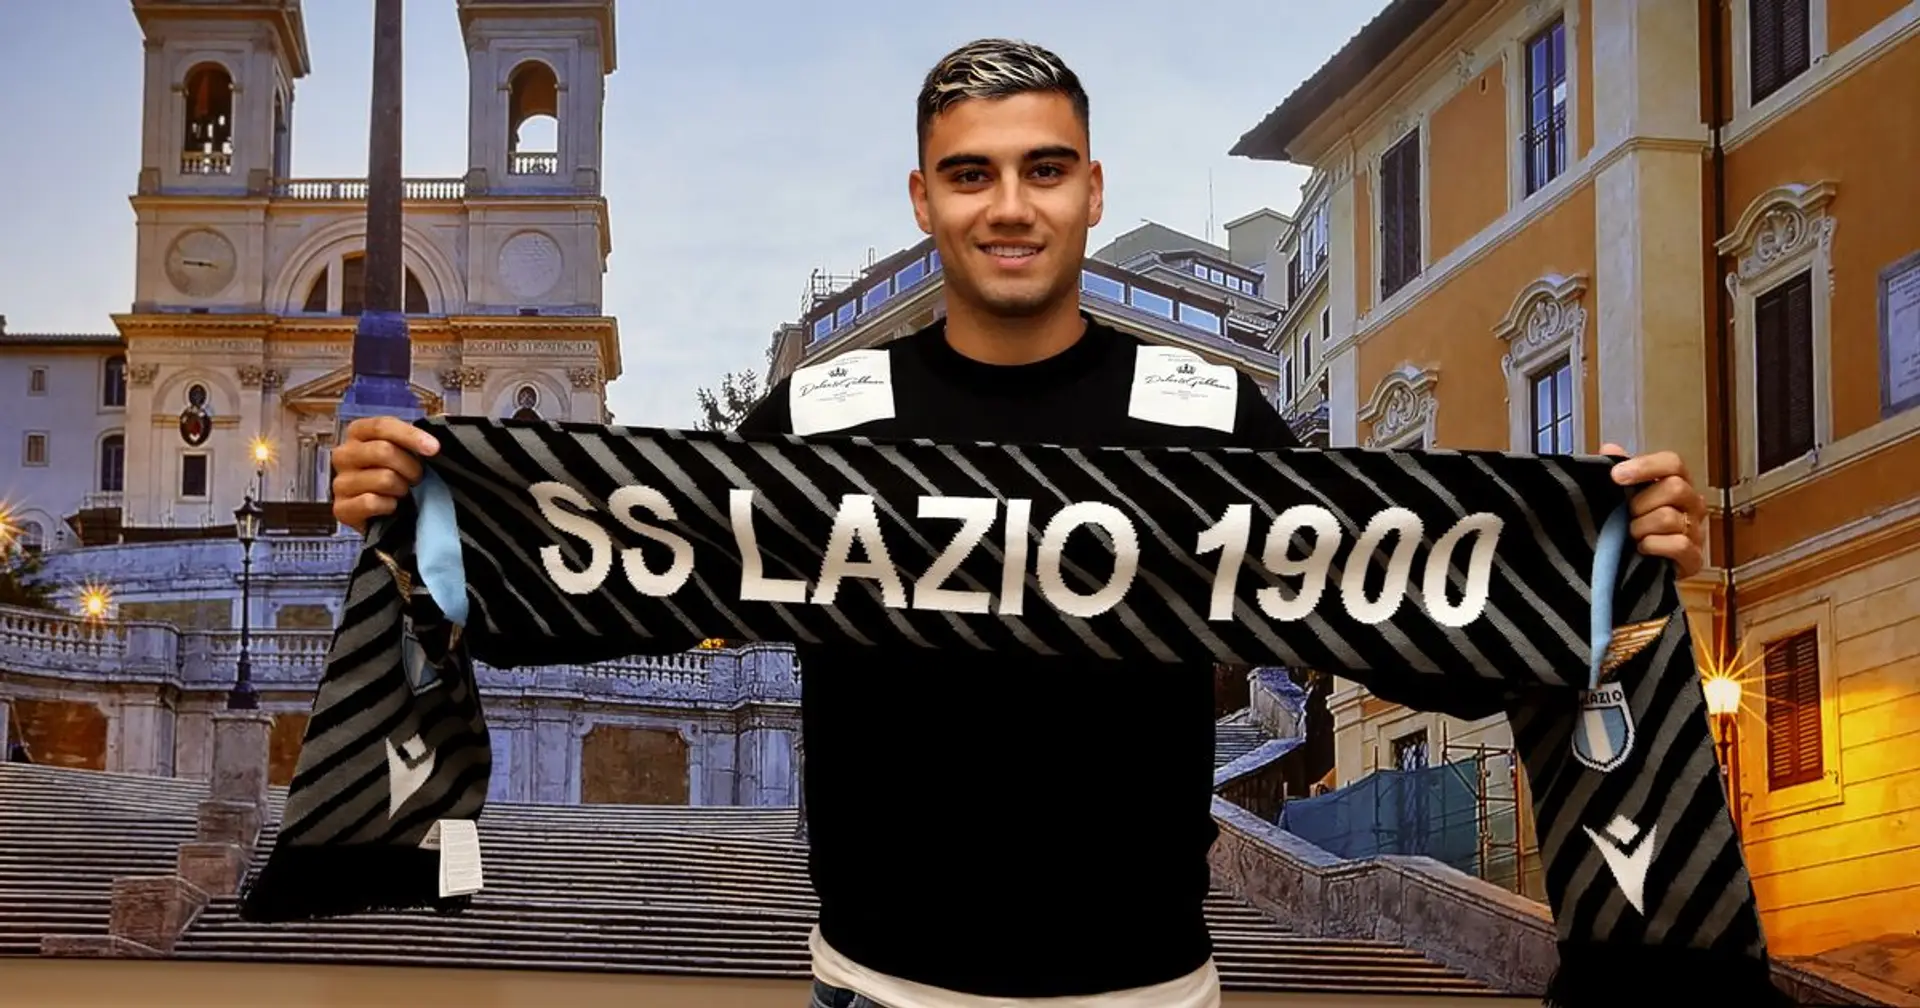 Andreas Pereira on playing first full game for Lazio: 'The most important thing is the victory'